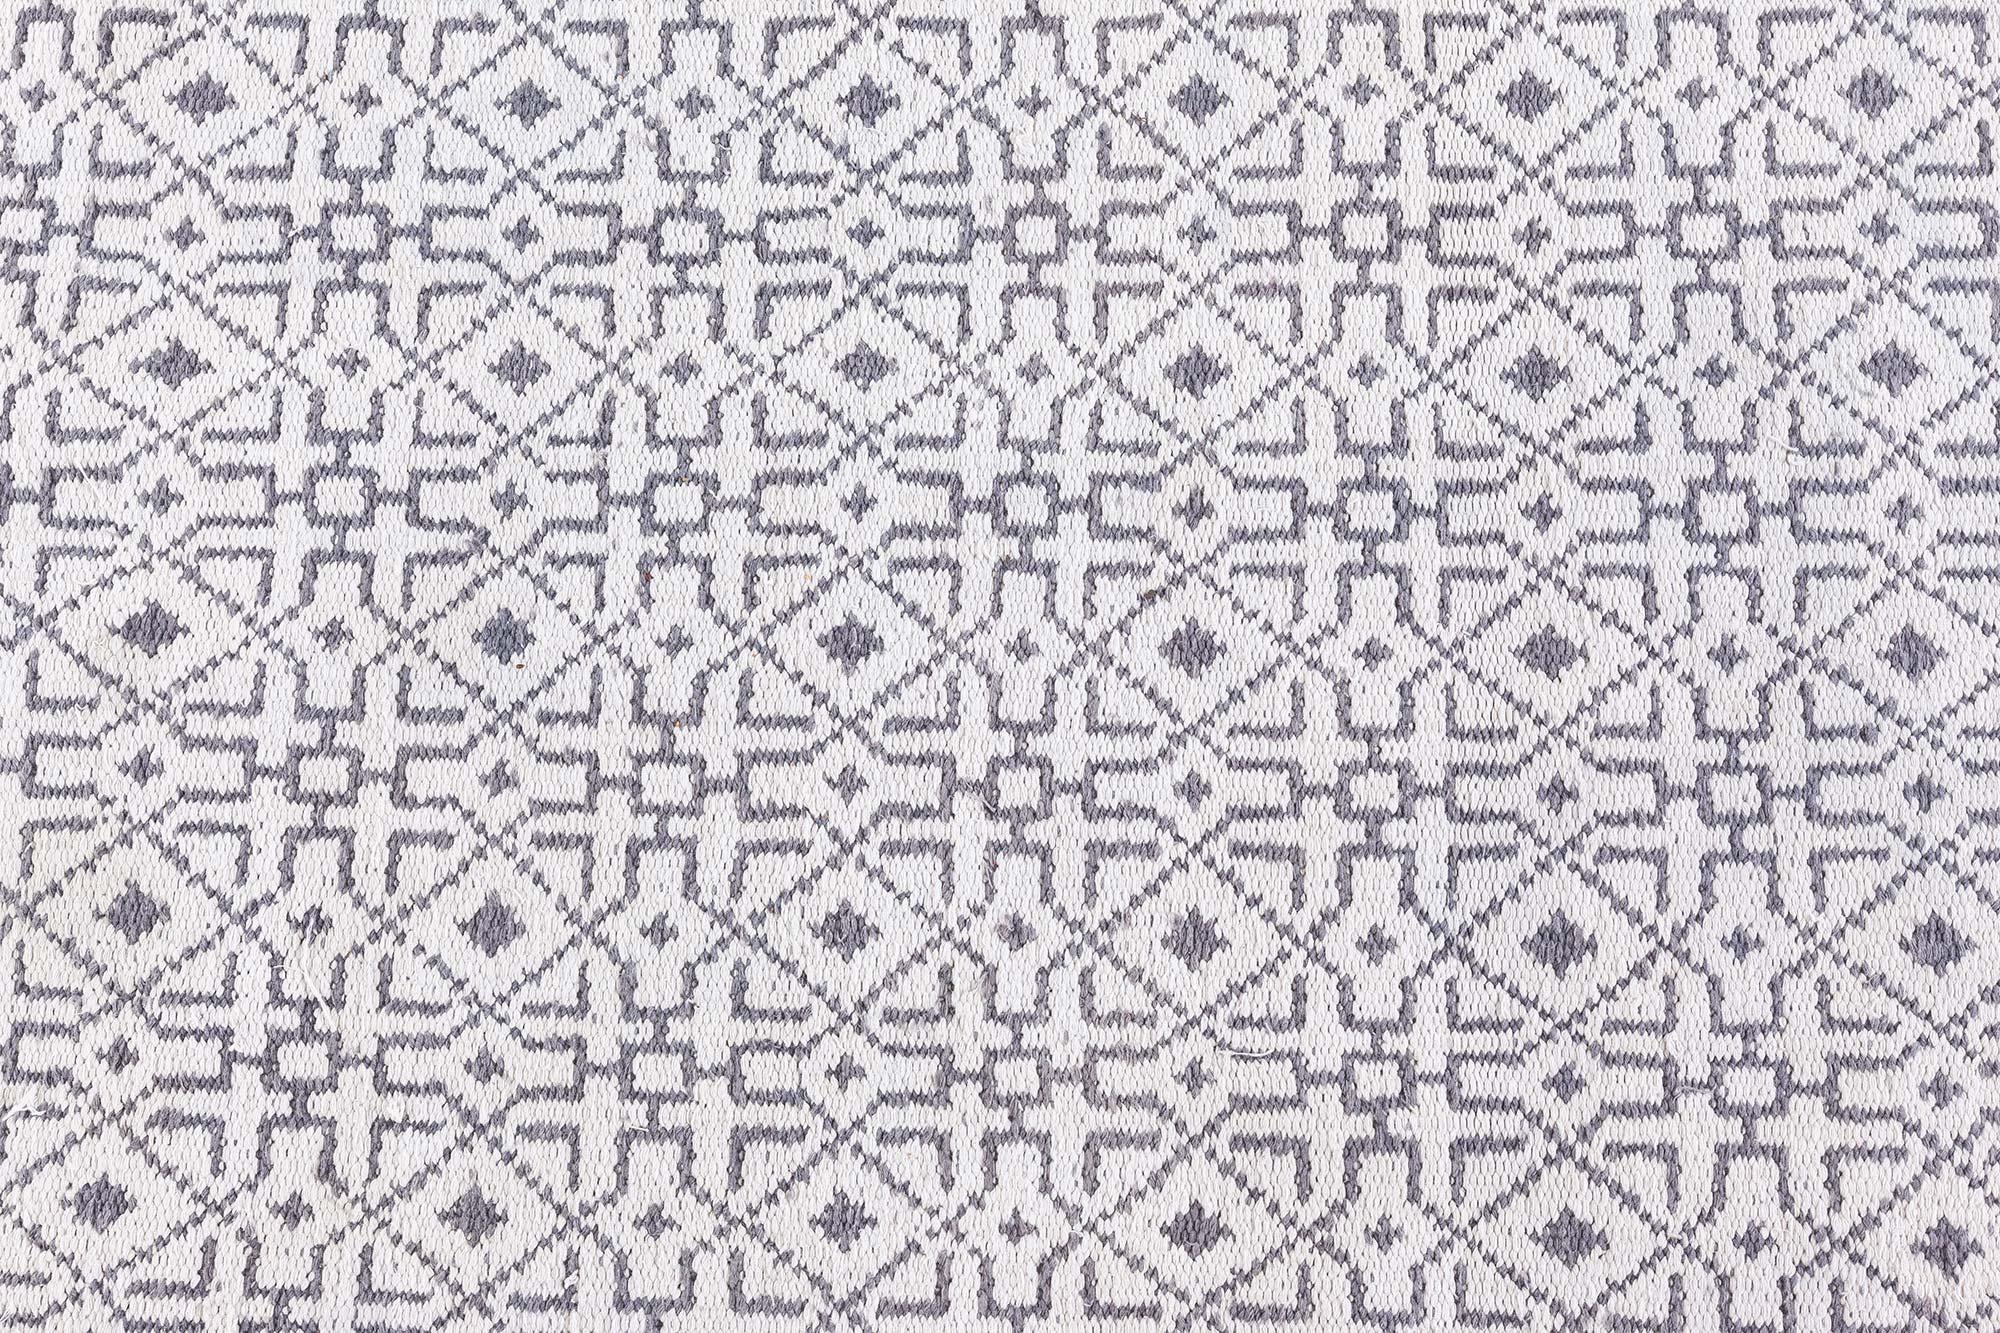 Cotton Agra Runner (Size Adjusted)
Size: 6'4